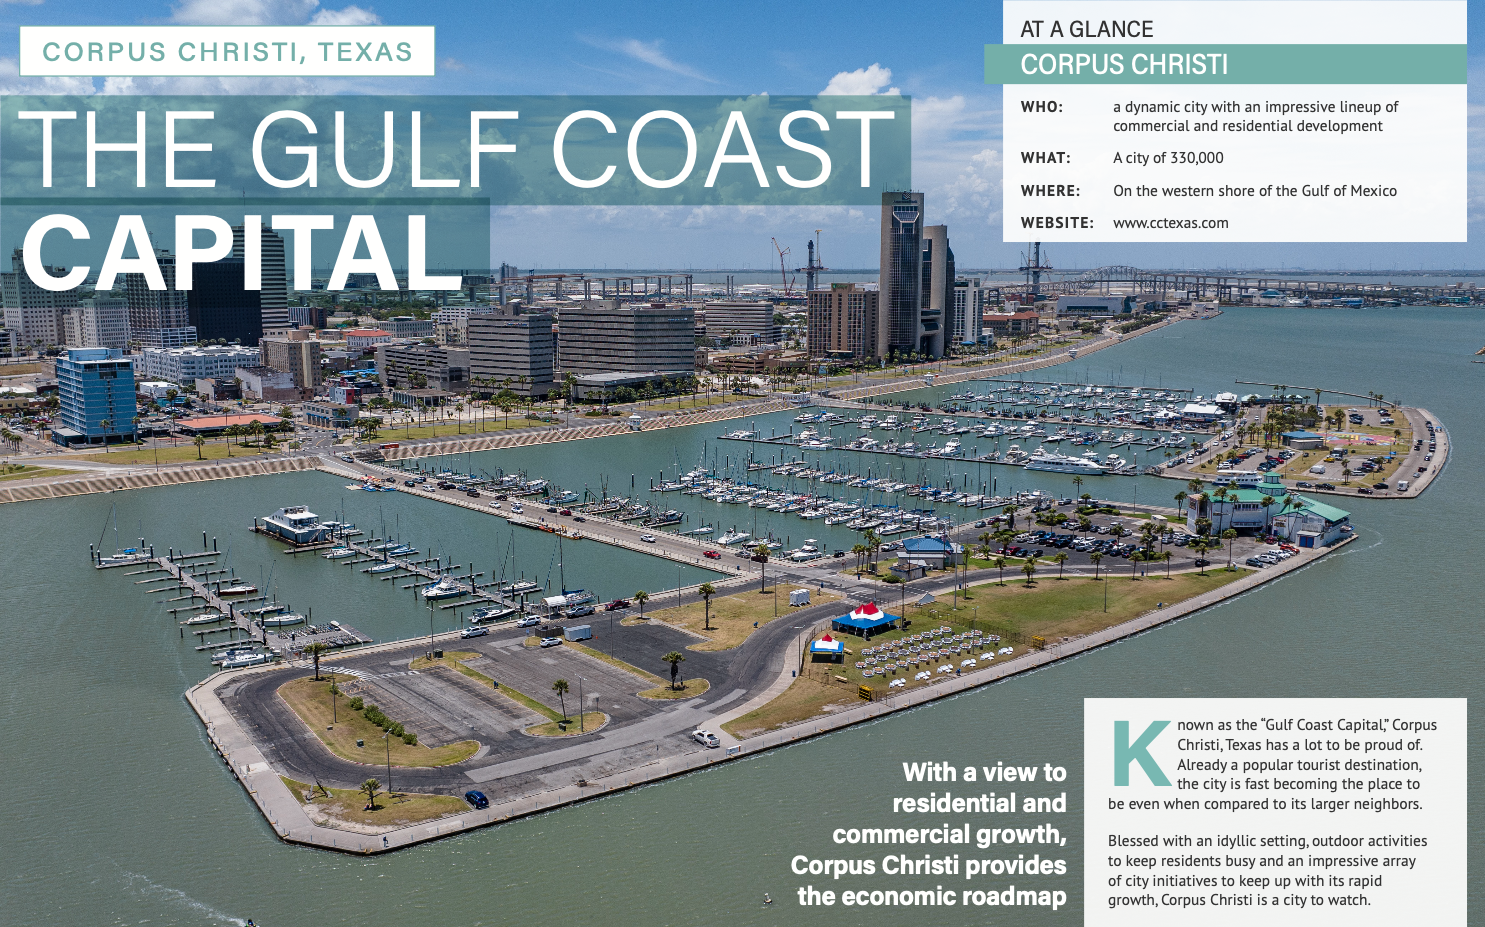 Hunden Partners is pleased to have been featured in Business View Magazine as advisors to the city of Corpus Christi, known as the “Gulf Coast Capital.”